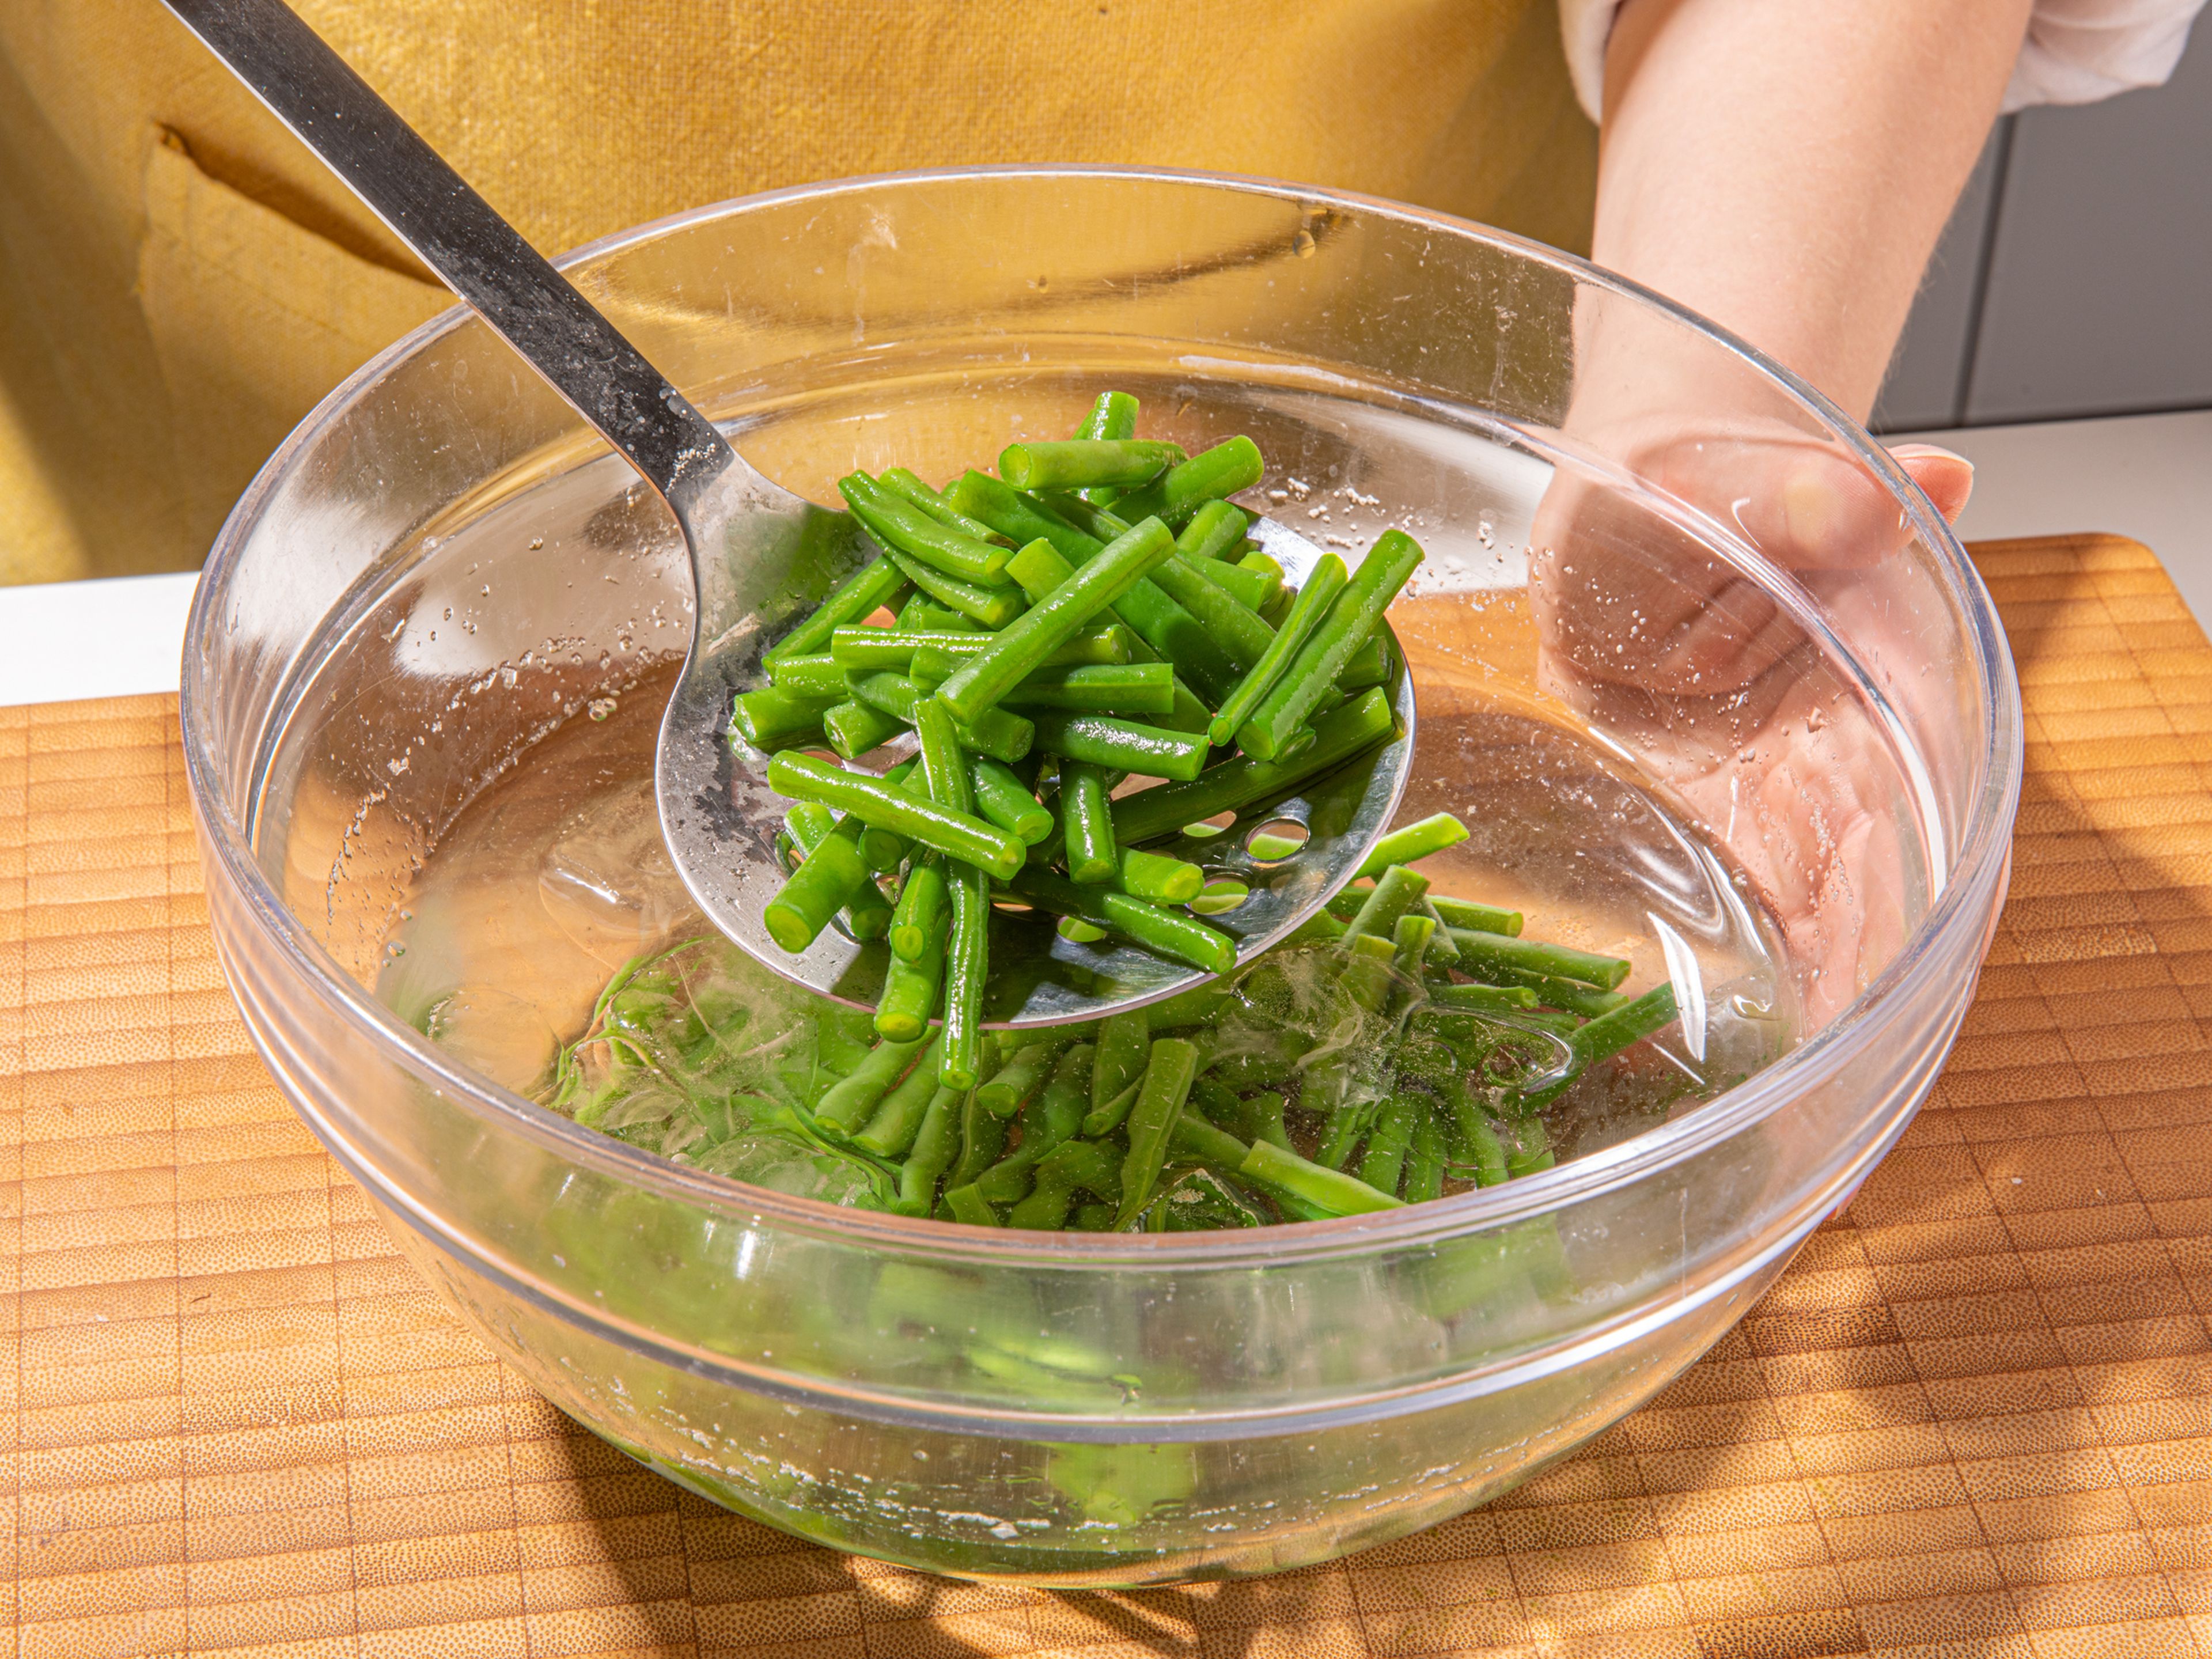 Blanch green beans in boiling, salted water for approx. 1 min. Drain and transfer to an ice bath. In a small bowl, mix the light soy sauce, sweet soy sauce, rice vinegar, and water. Squeeze out most of the liquid from the mushrooms with your hands. Discard the liquid and toss squeezed mushrooms with brown sugar.